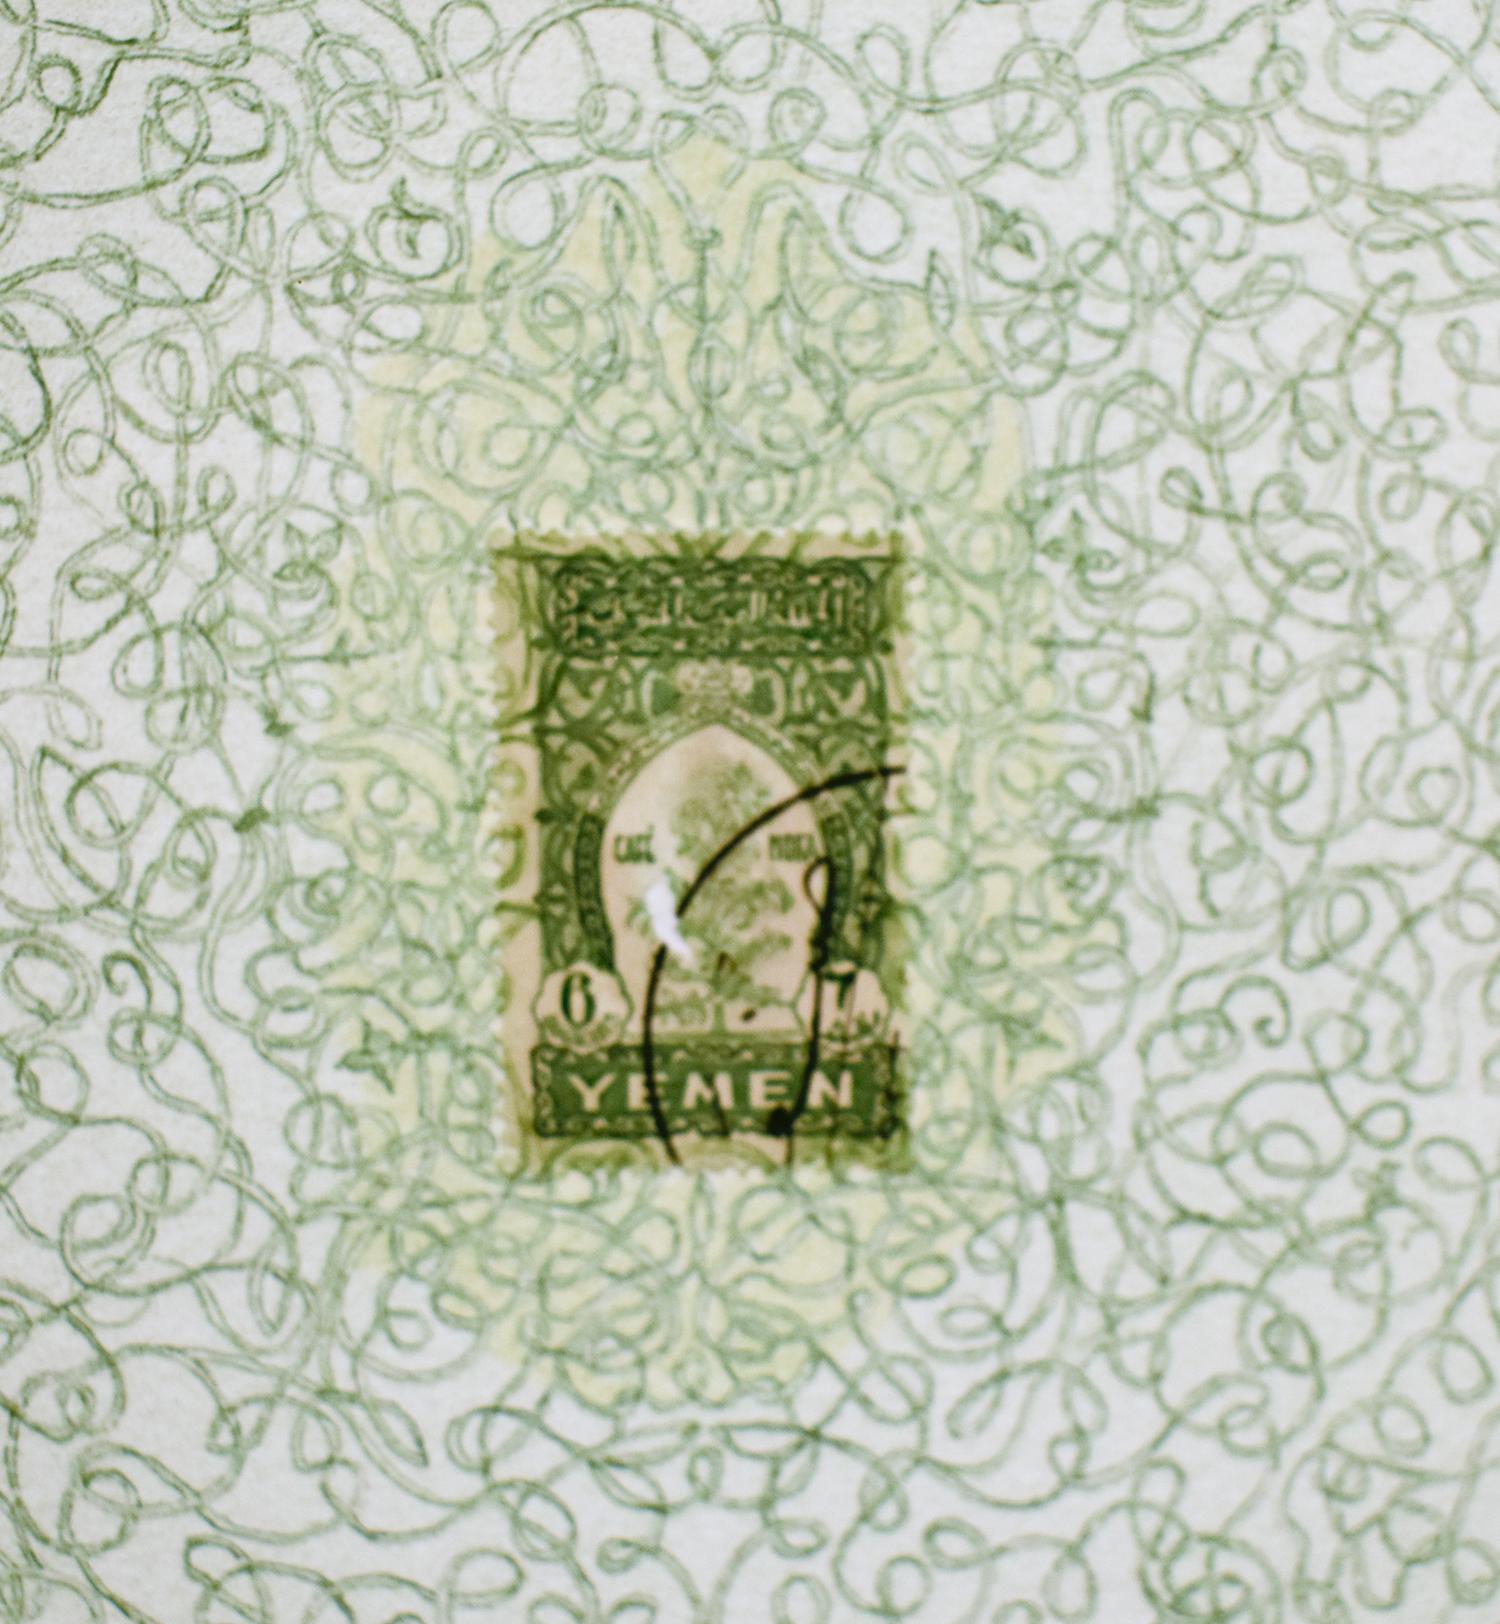 Yemen (Coffee Plant): Green Abstract Colored Pencil Drawing, Framed - Art by Andrea Moreau